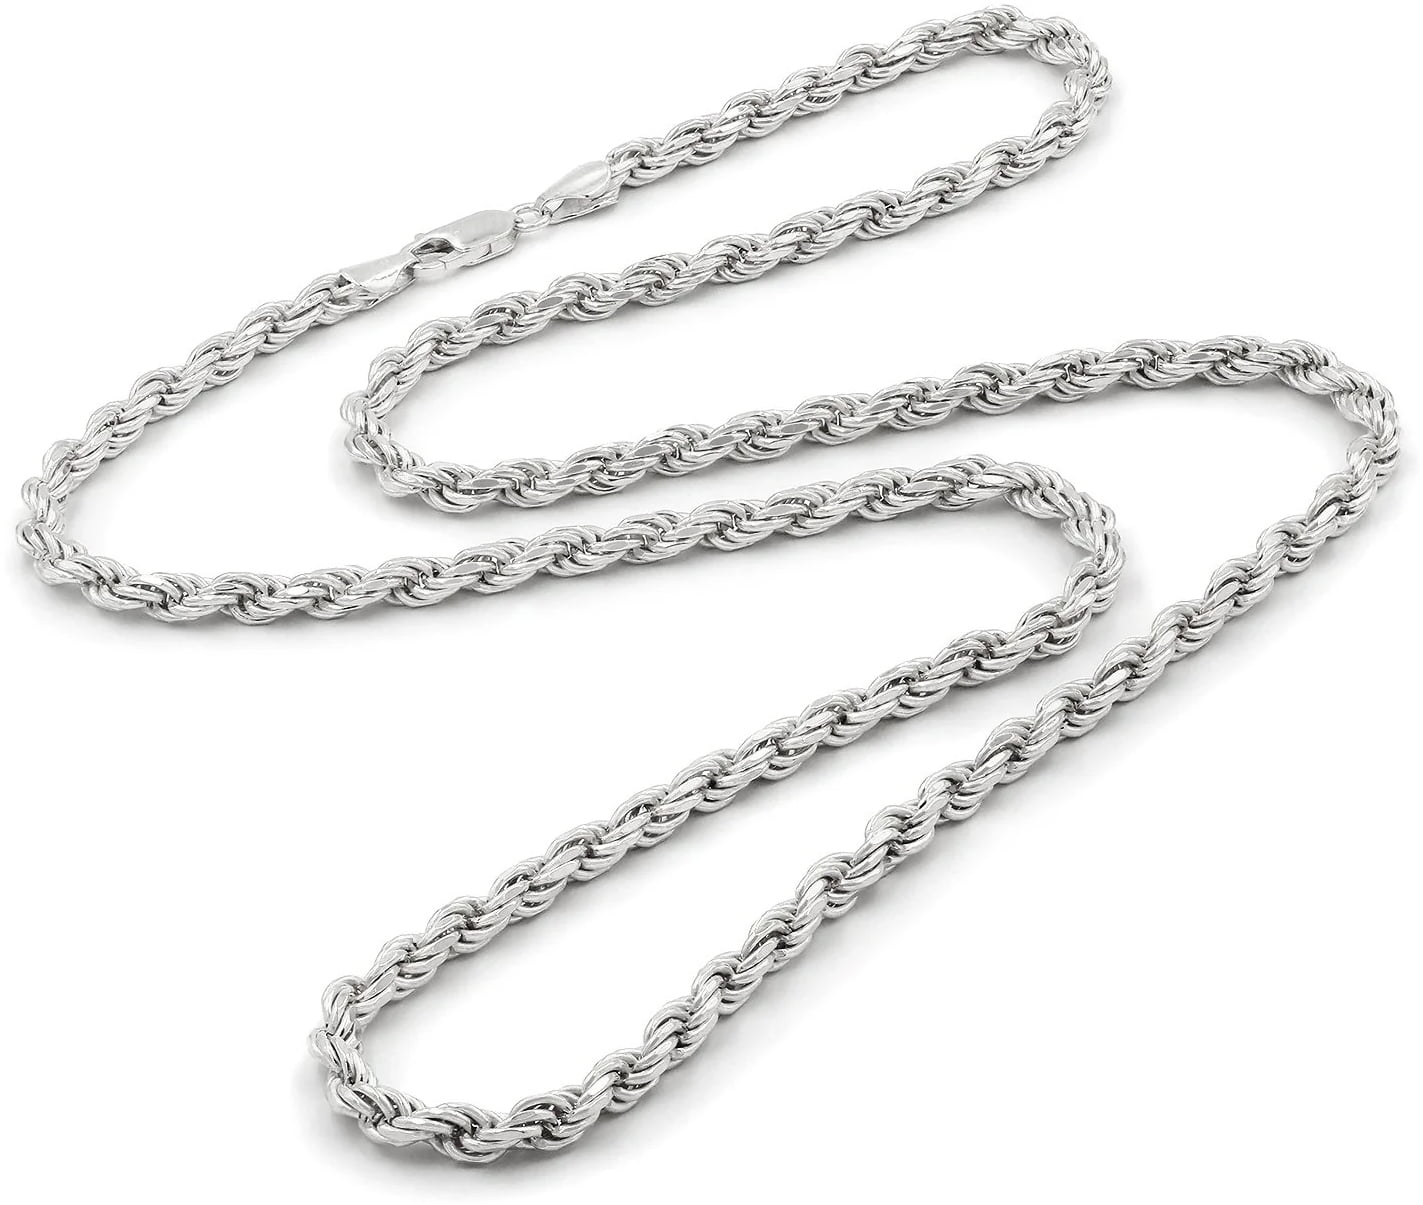 OCHCOH 925 Sterling Silver Clasp 2/2.5/3/4/5mm Rope Chain for Men Women  Diamond Cut Chain Necklace 16, 18, 20, 22, 24, 26, 30 Inch 